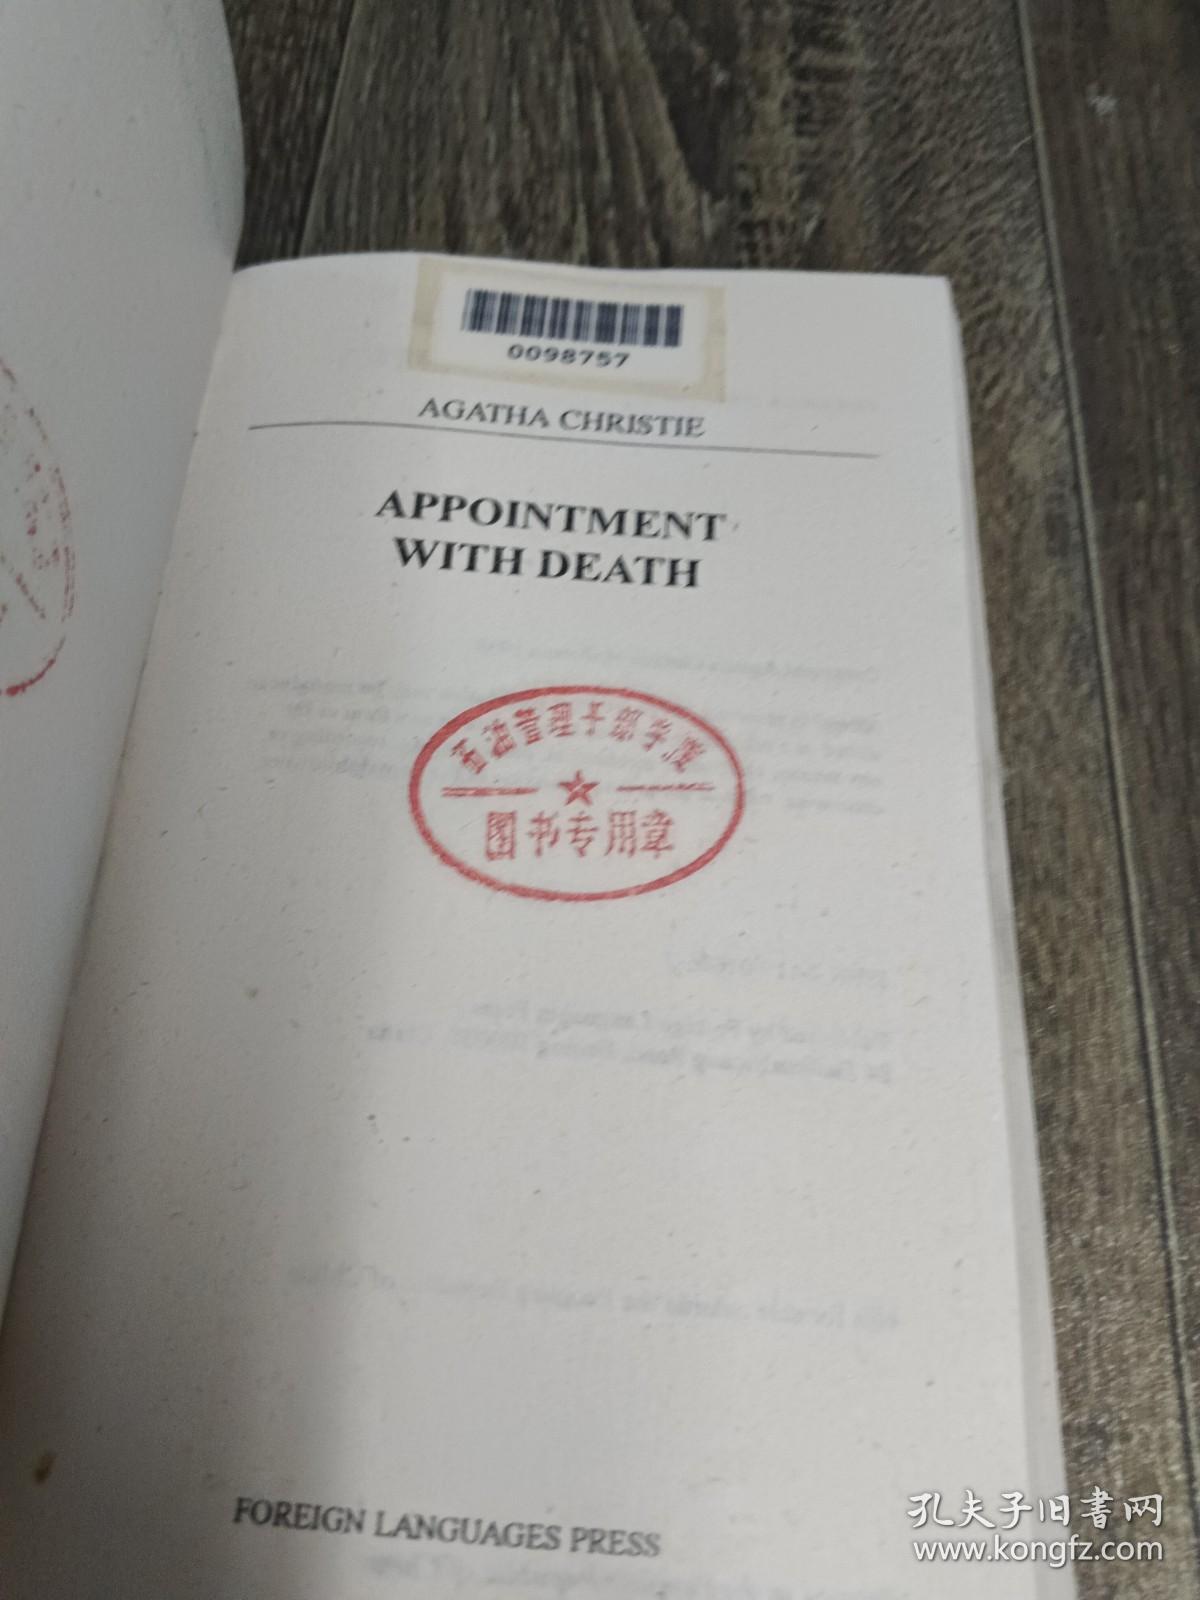 APPOINTMENT WITH DEATH 死亡约会（英文版）